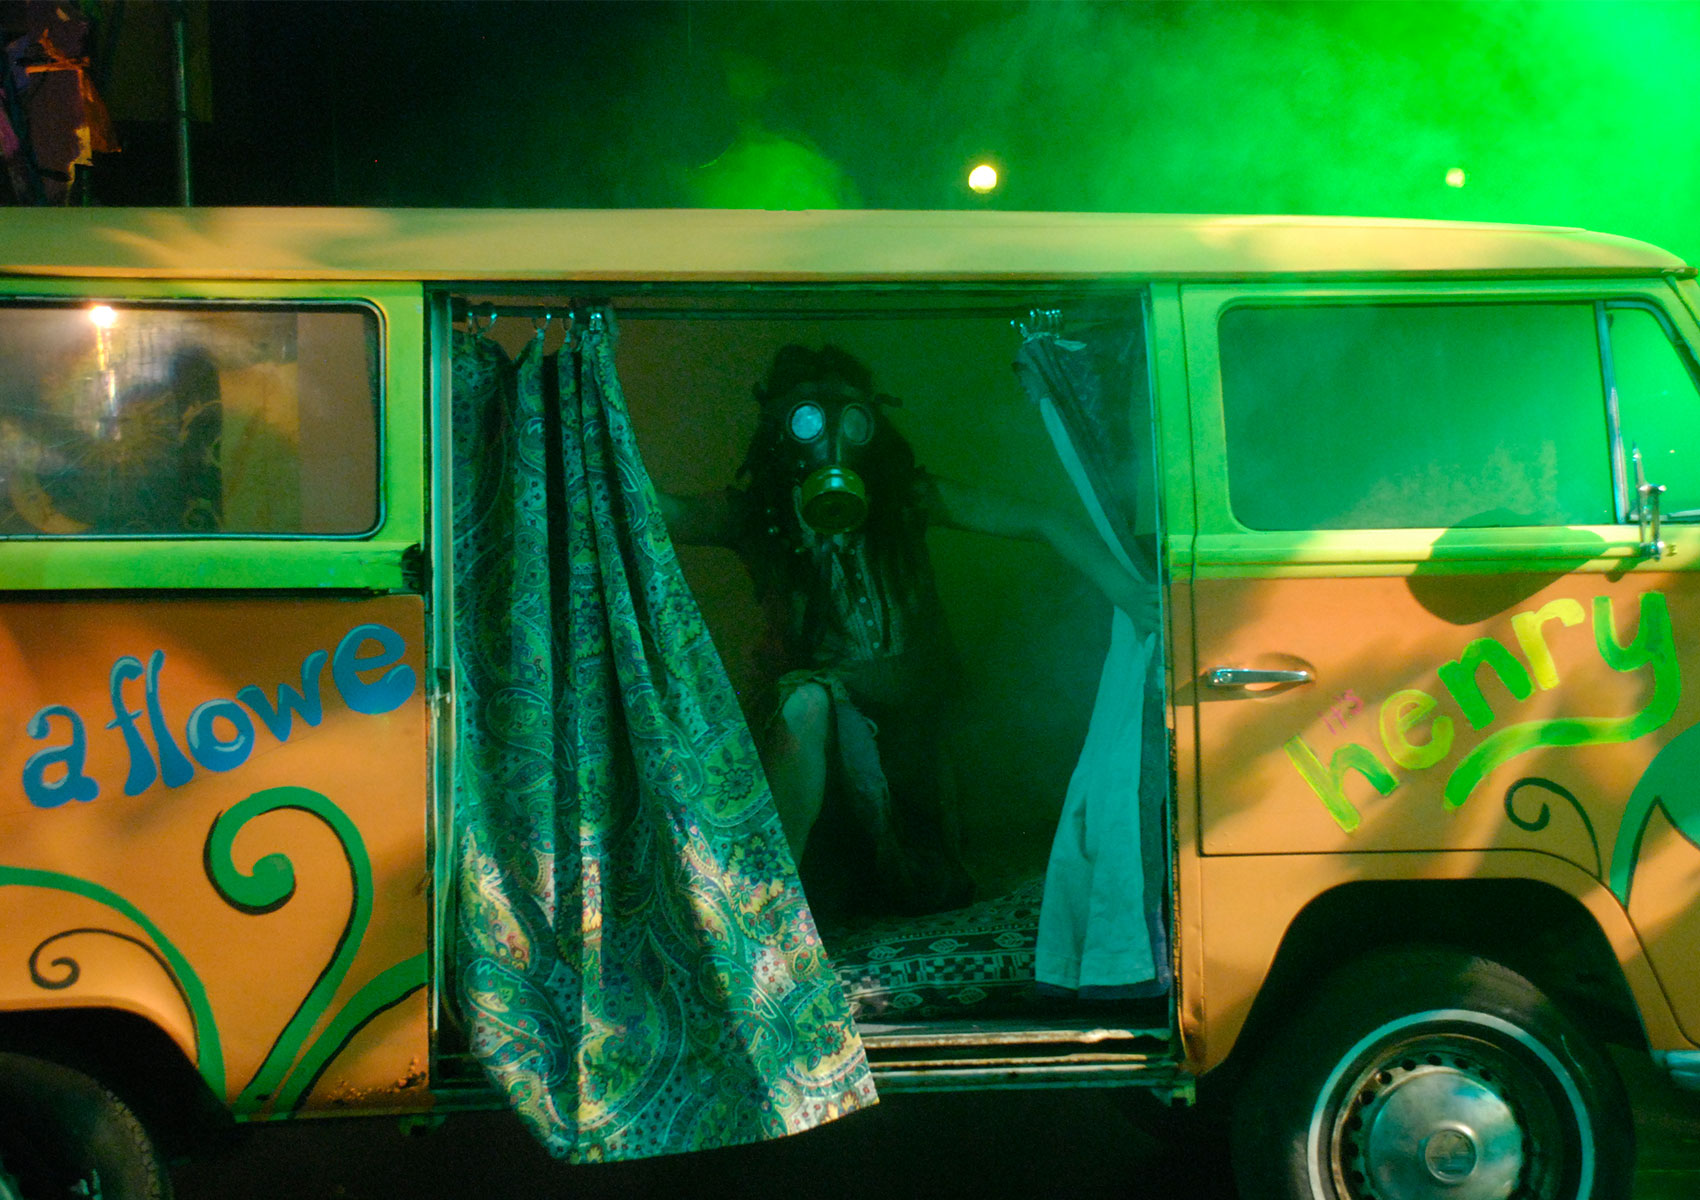 A woman pushes aside the curtains on the side of a 1960s van while wearing a gas mask and being spotlighted by green light.